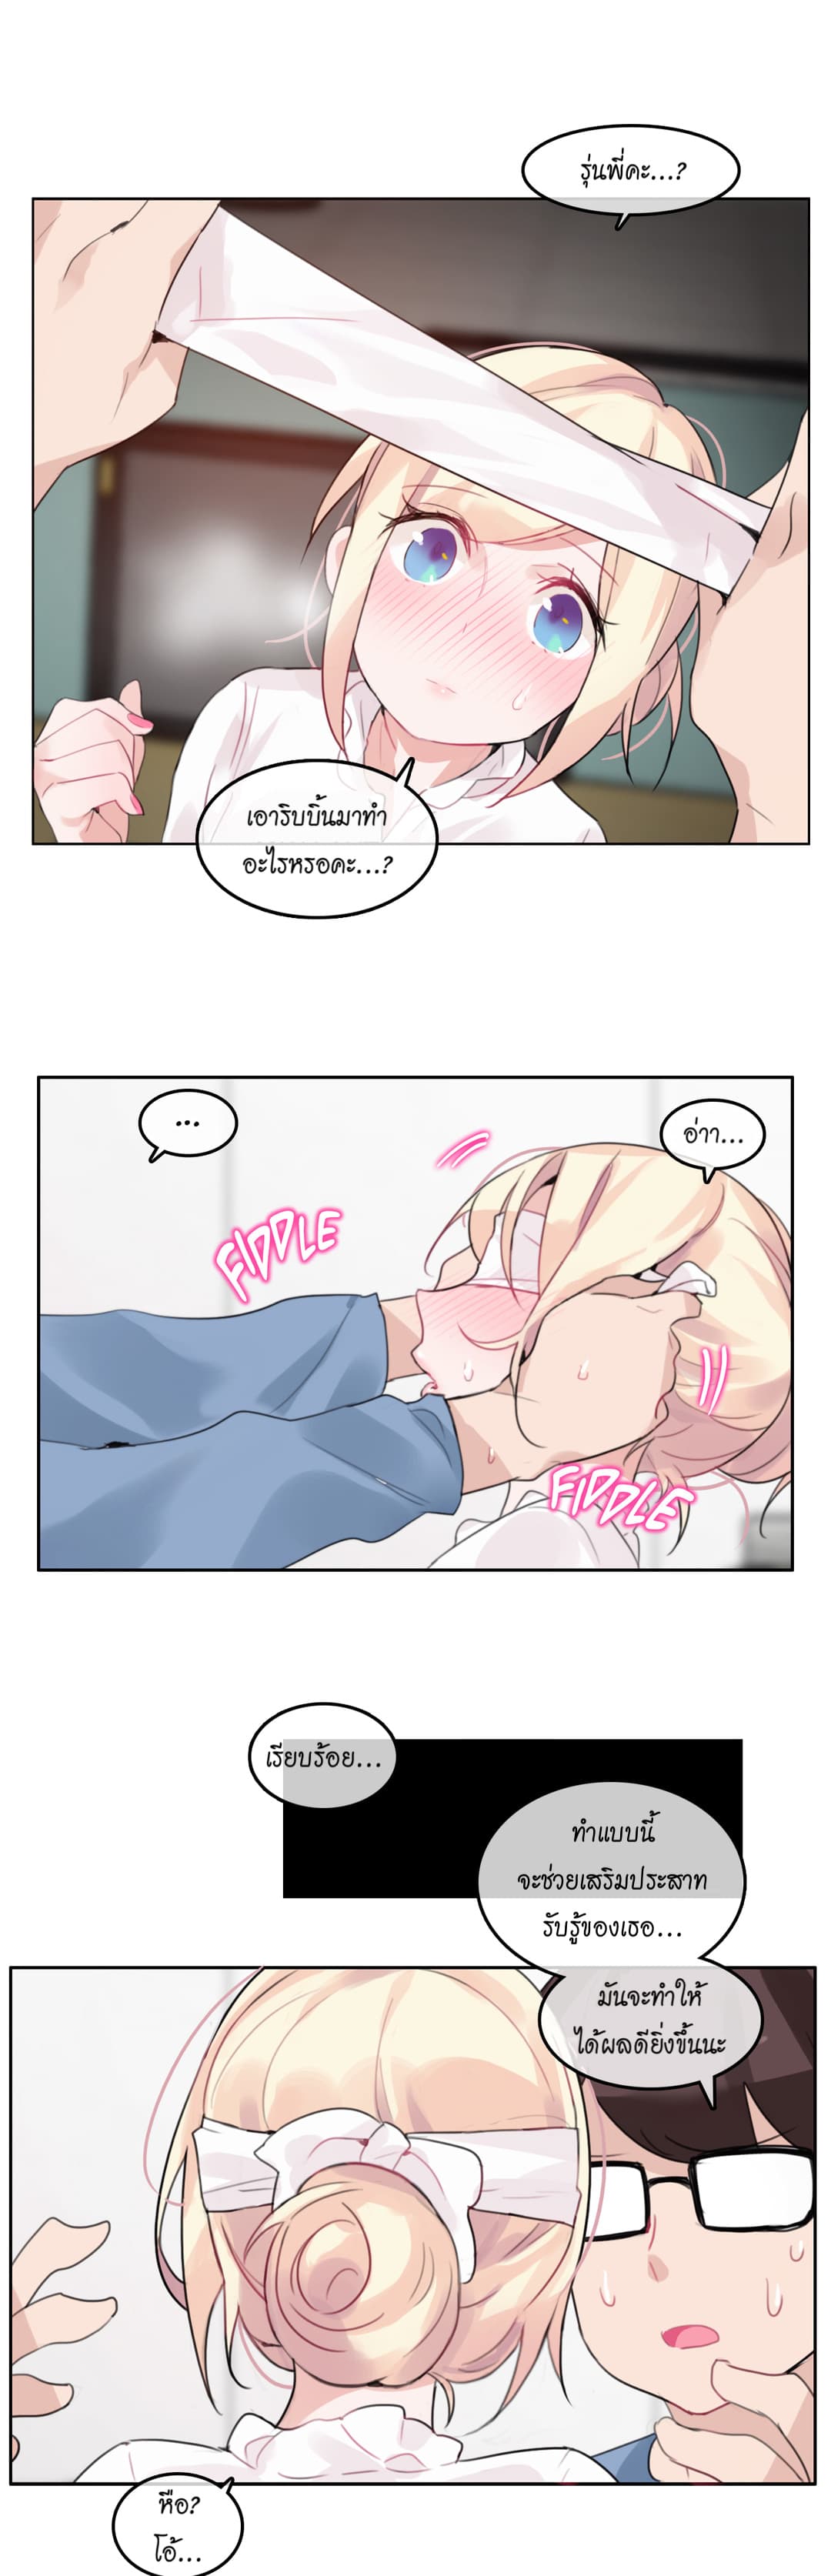 A Pervert’s Daily Life 24 (11)